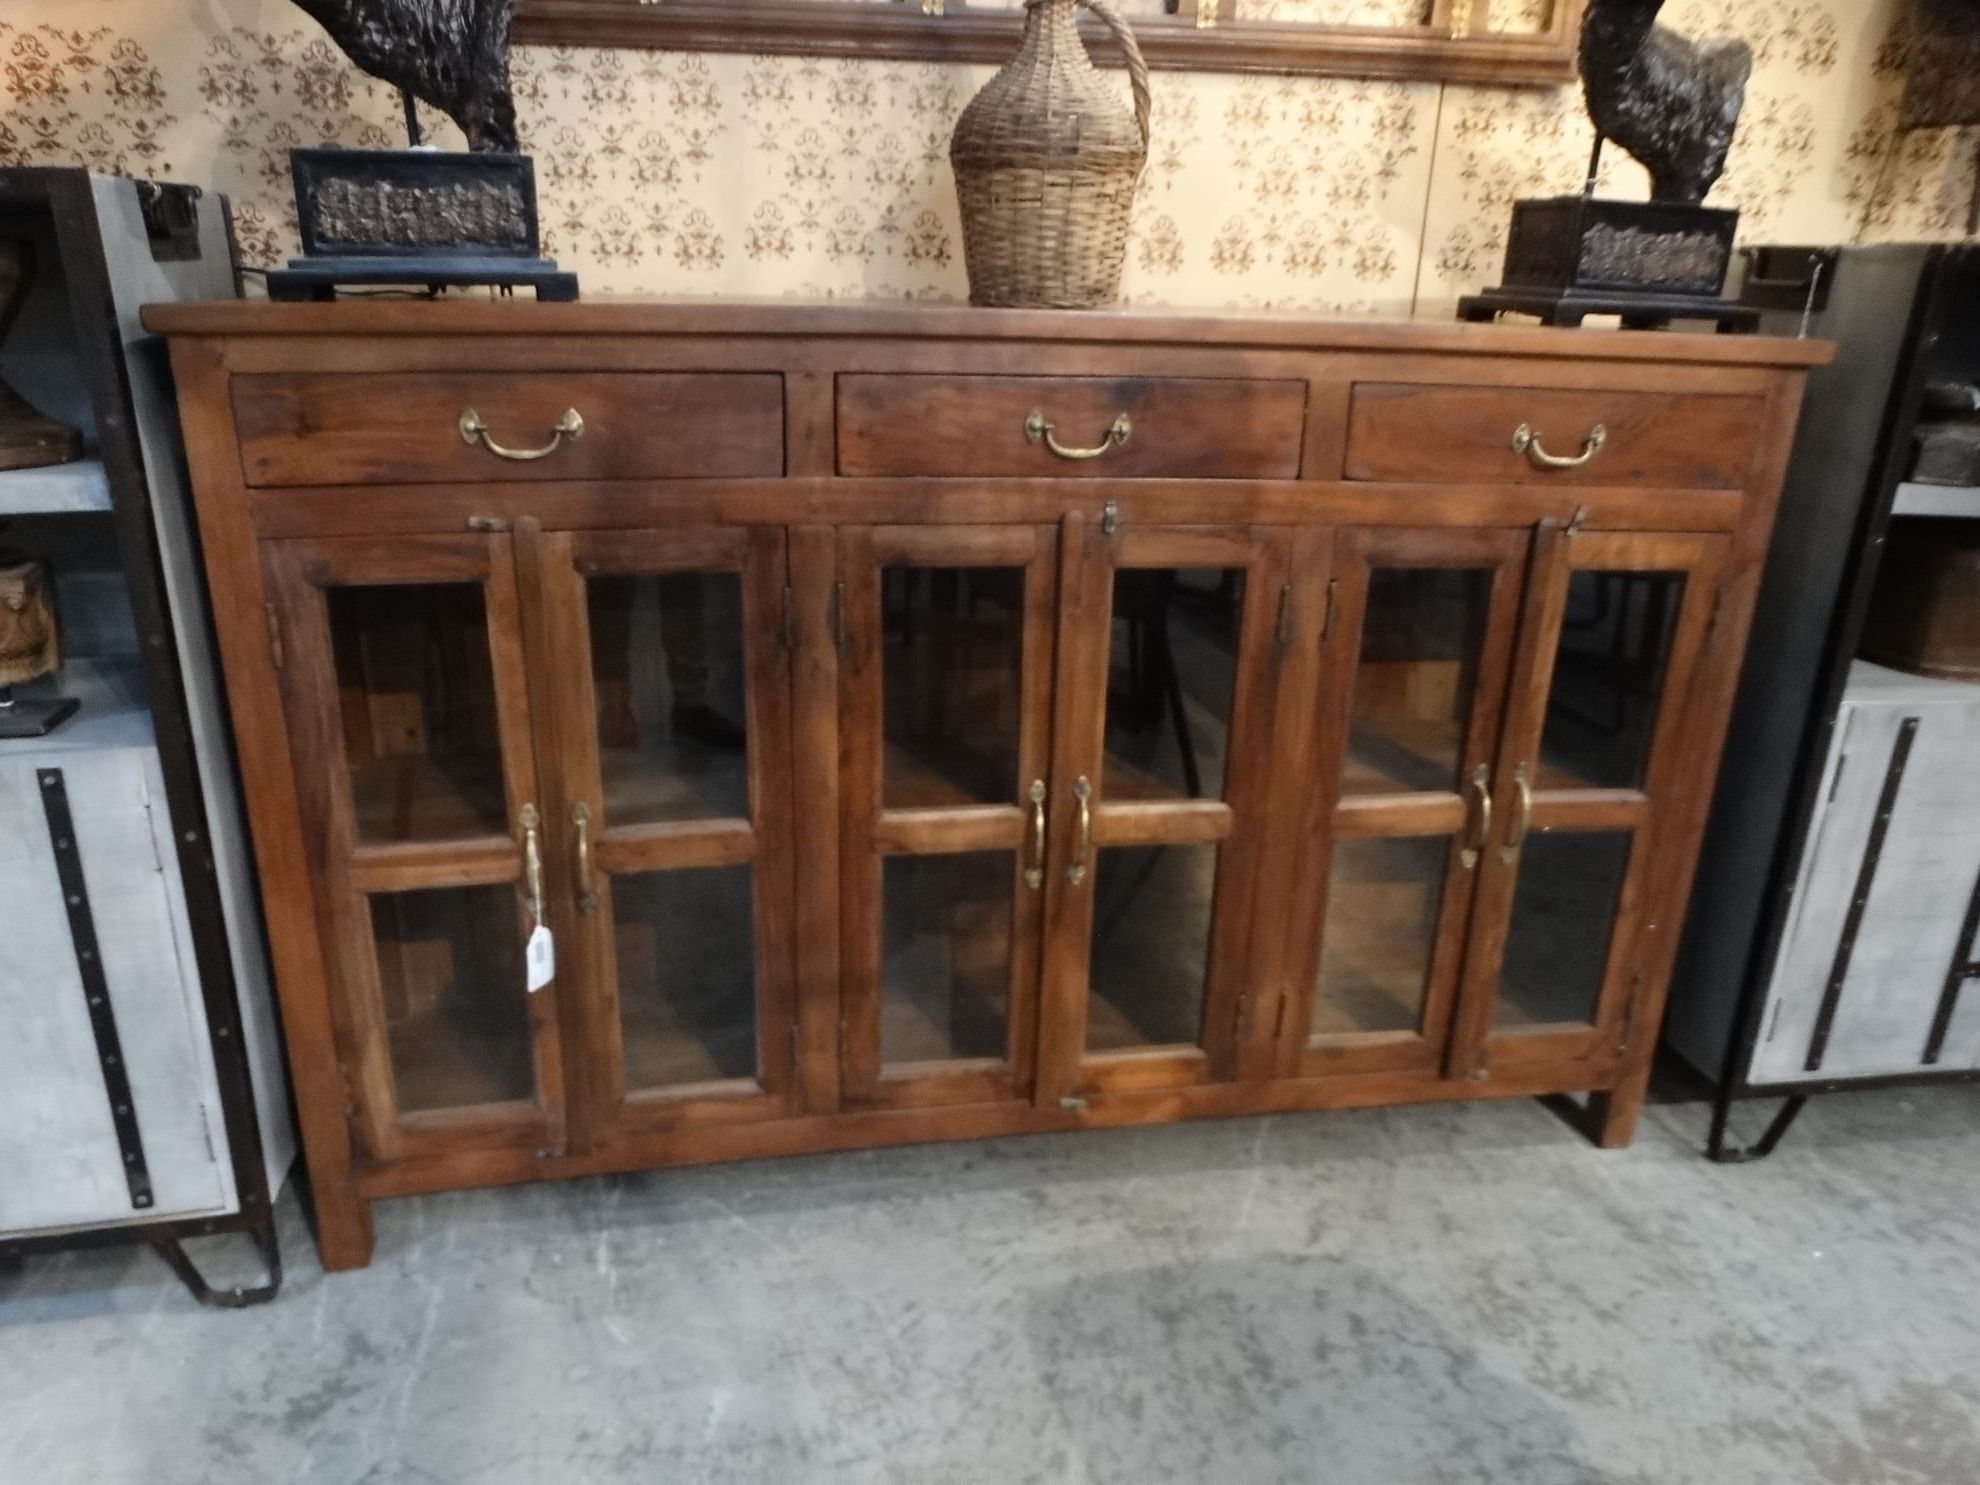 Antique Storage Sideboards With Doors Intended For Most Popular Buy Stackable Sideboard Buffet Storage Cabinet Online (View 10 of 15)